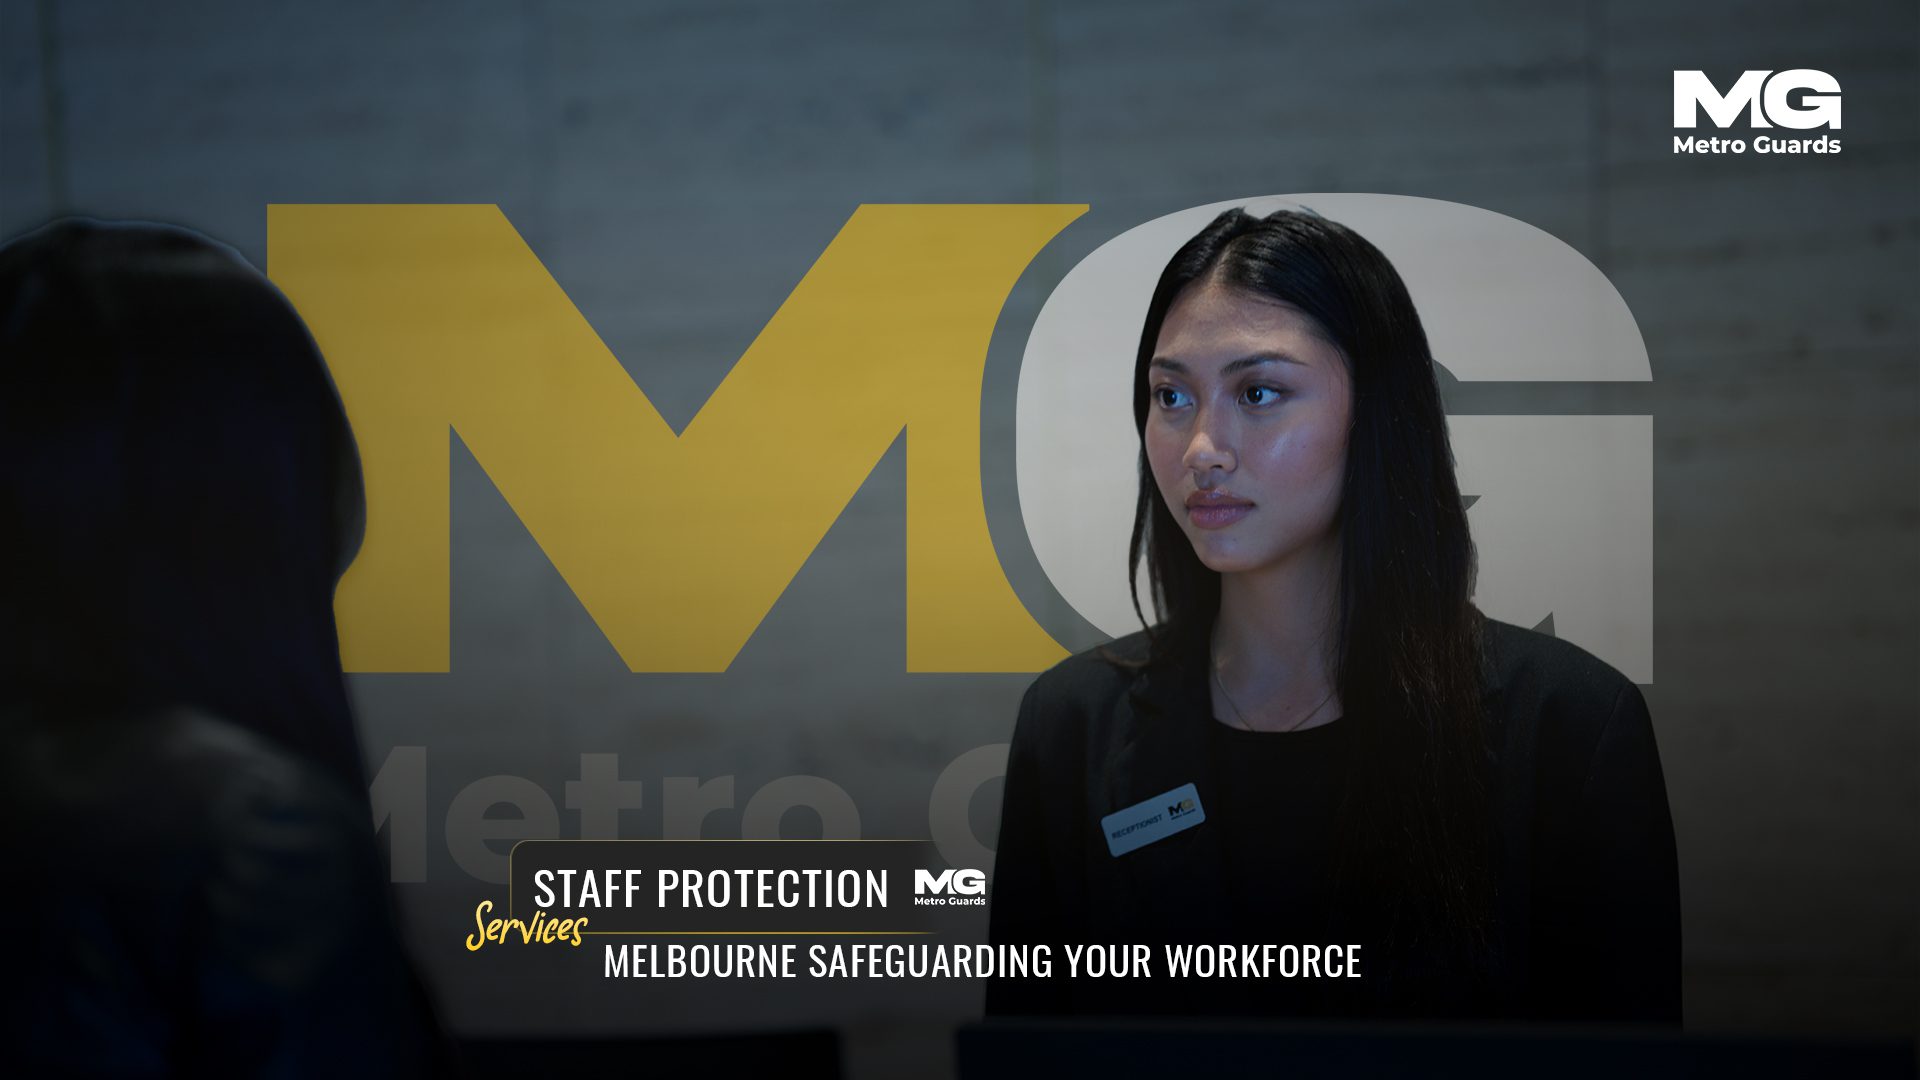 Staff Protection Services Melbourne: Safeguarding Your Workforce